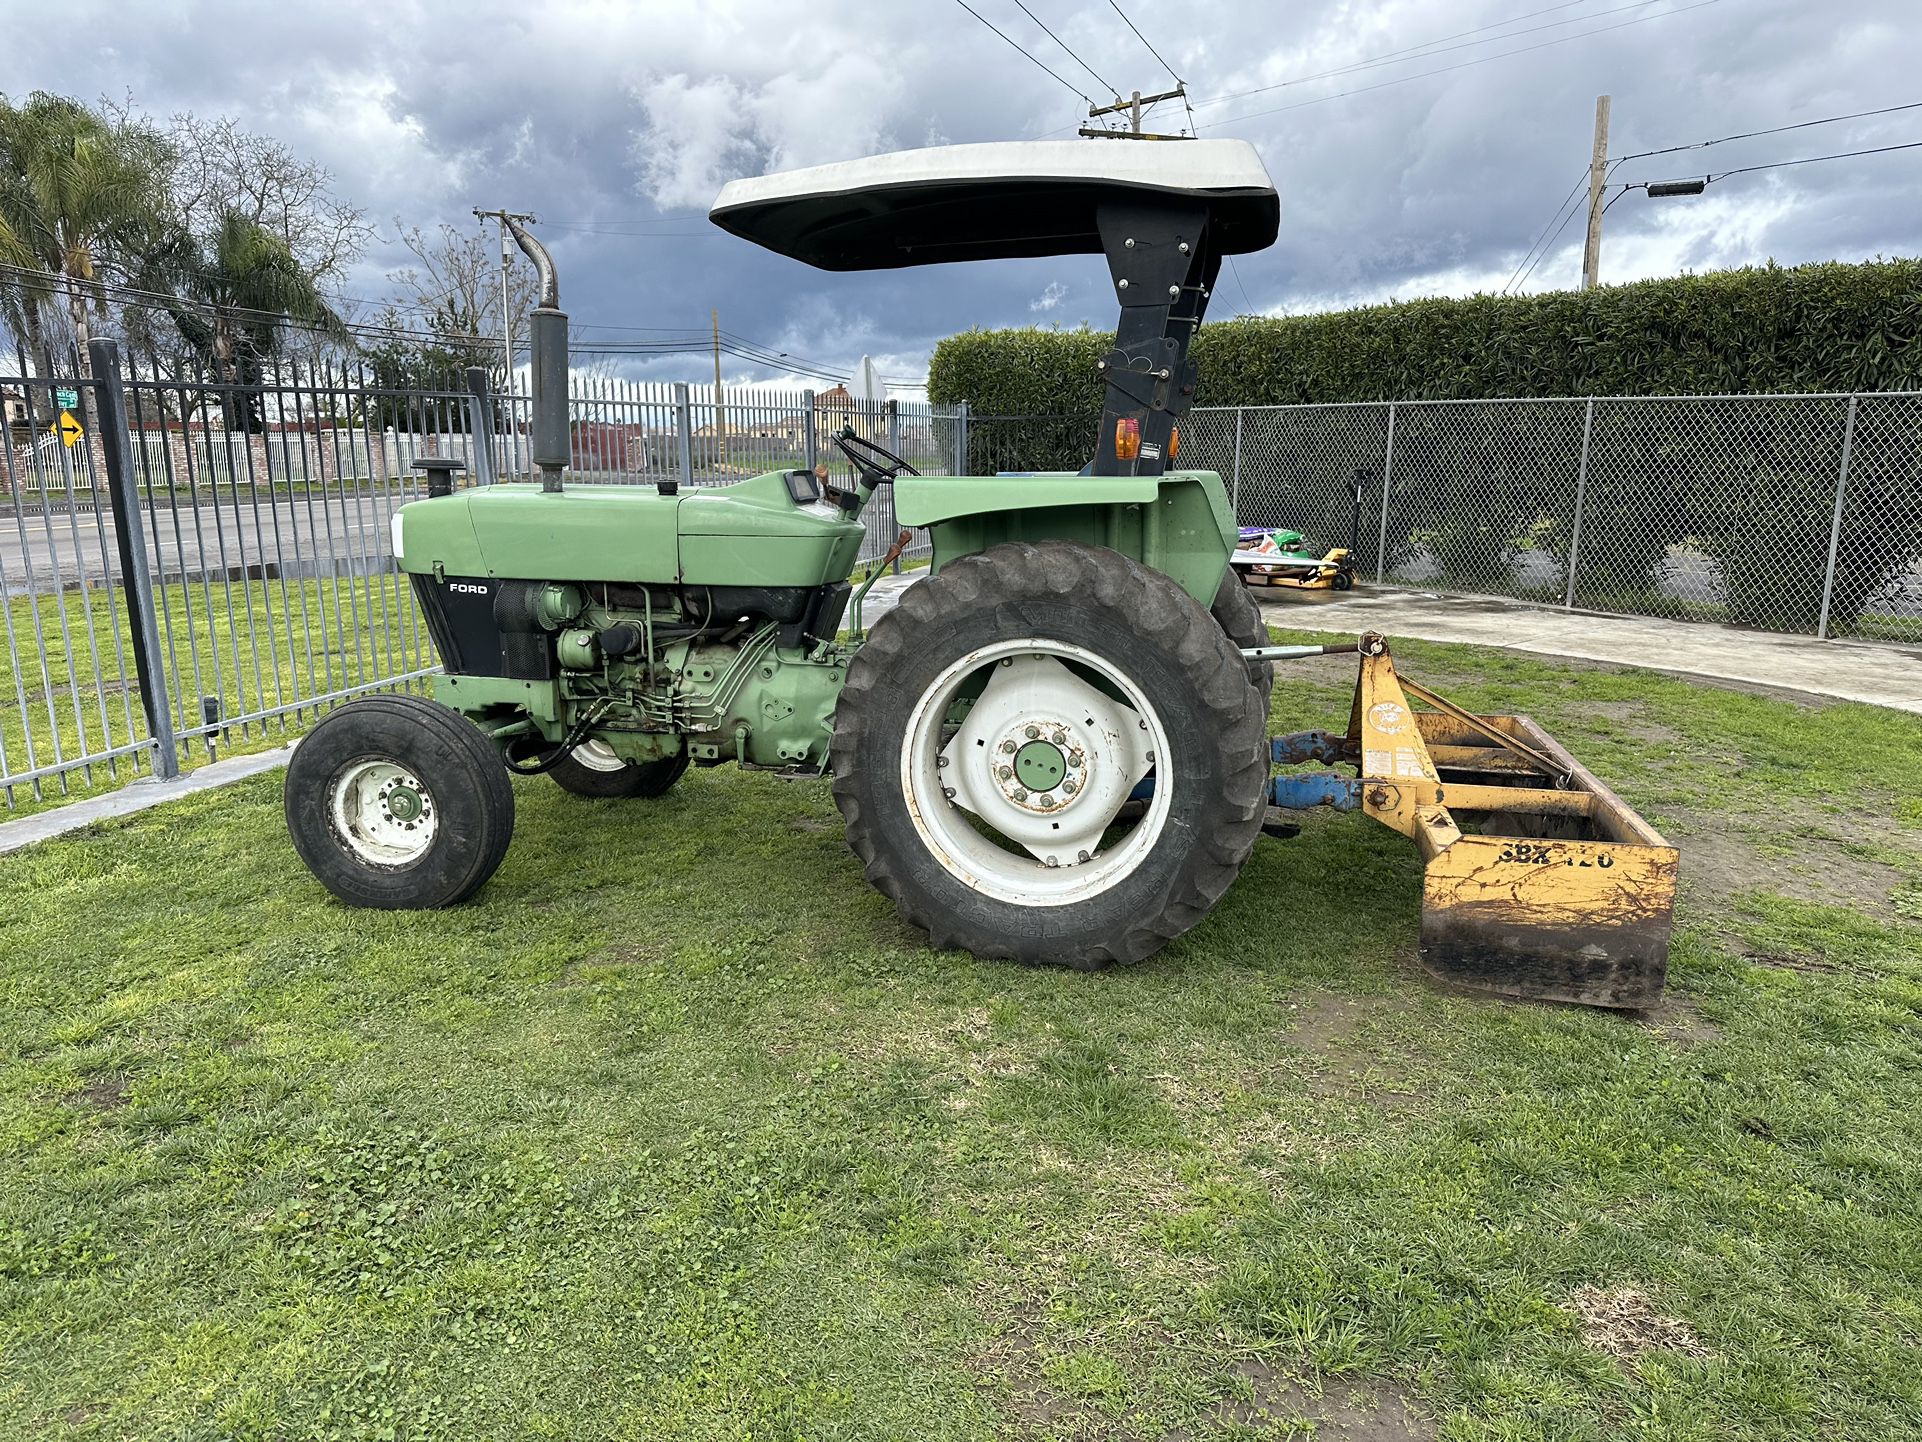 Ford 4630 Diesel Tractor With Scraper Box 